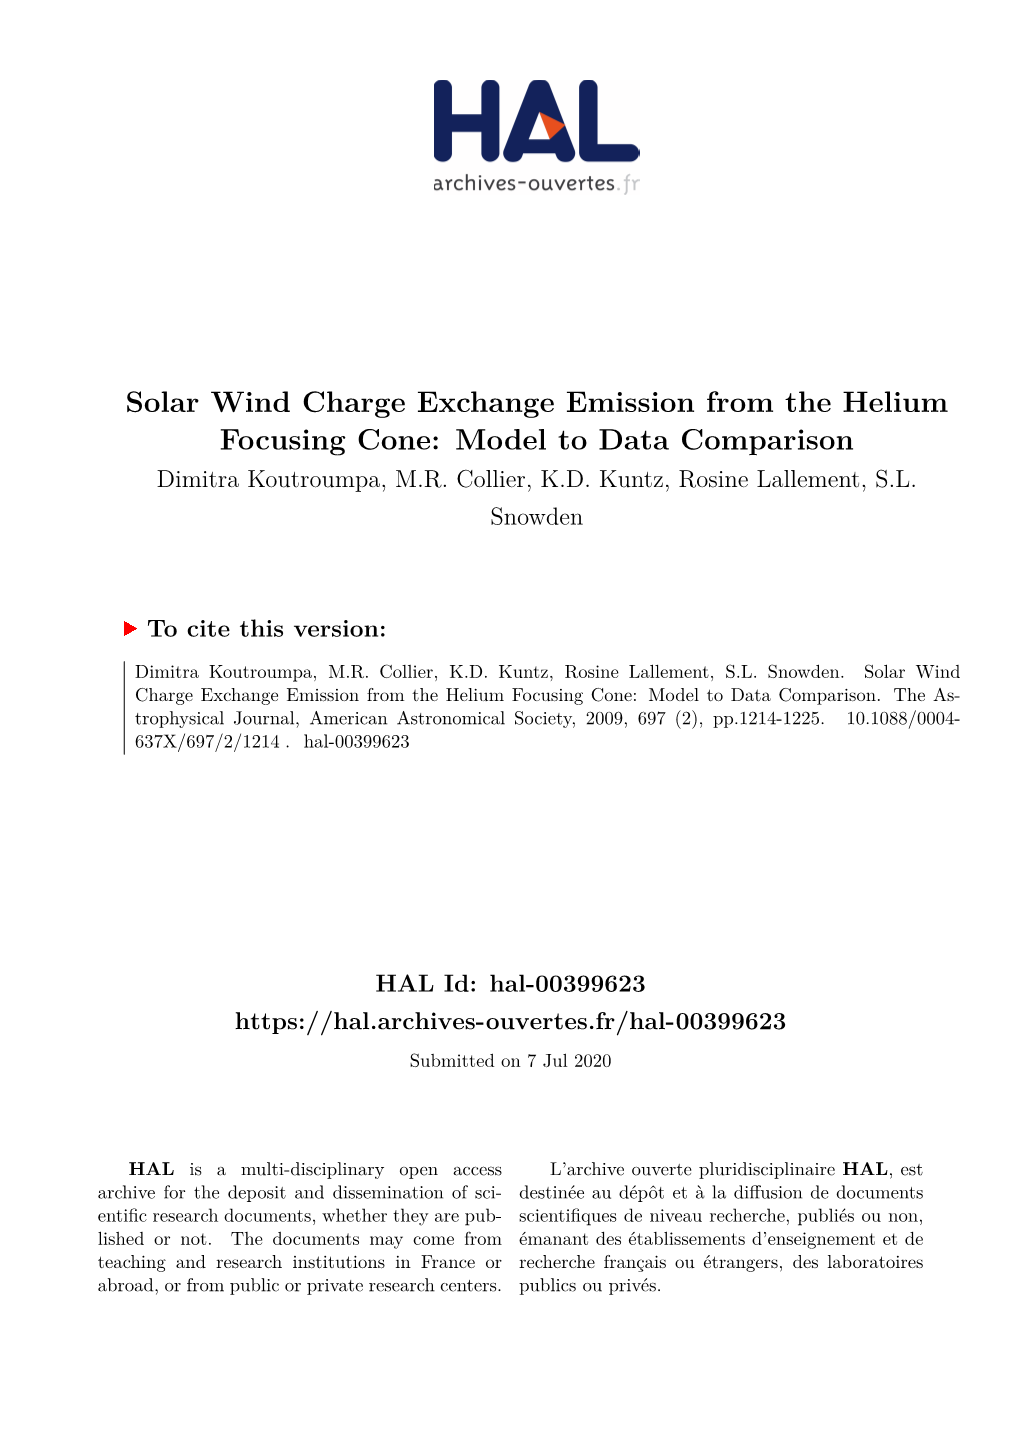 Solar Wind Charge Exchange Emission from the Helium Focusing Cone: Model to Data Comparison Dimitra Koutroumpa, M.R